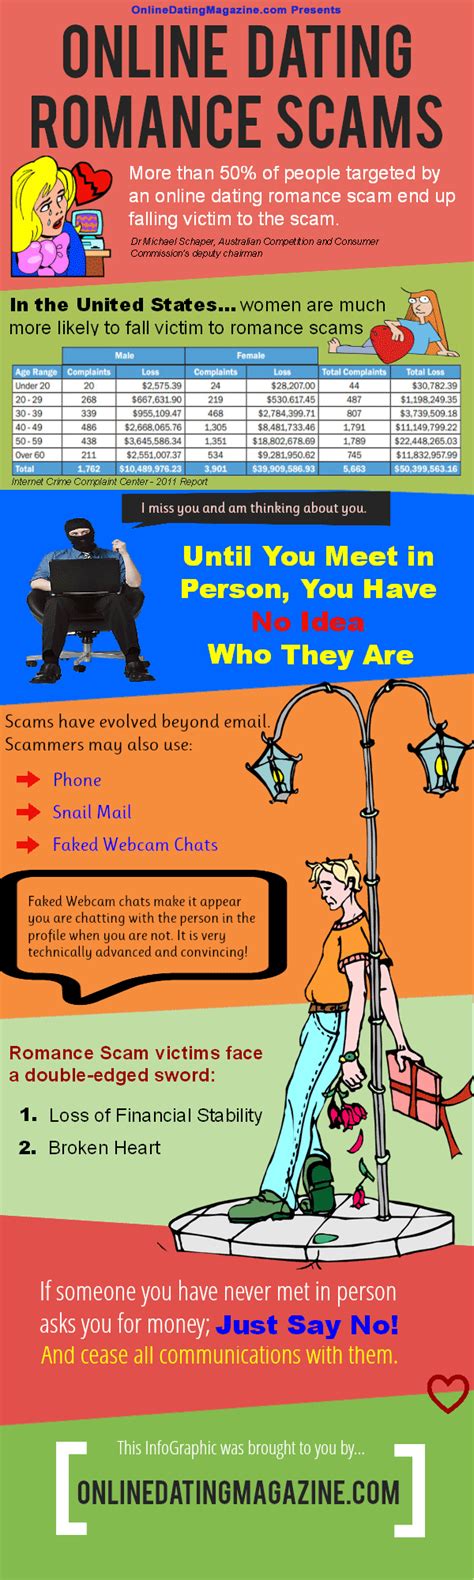 online dating romance scam infographic public records news